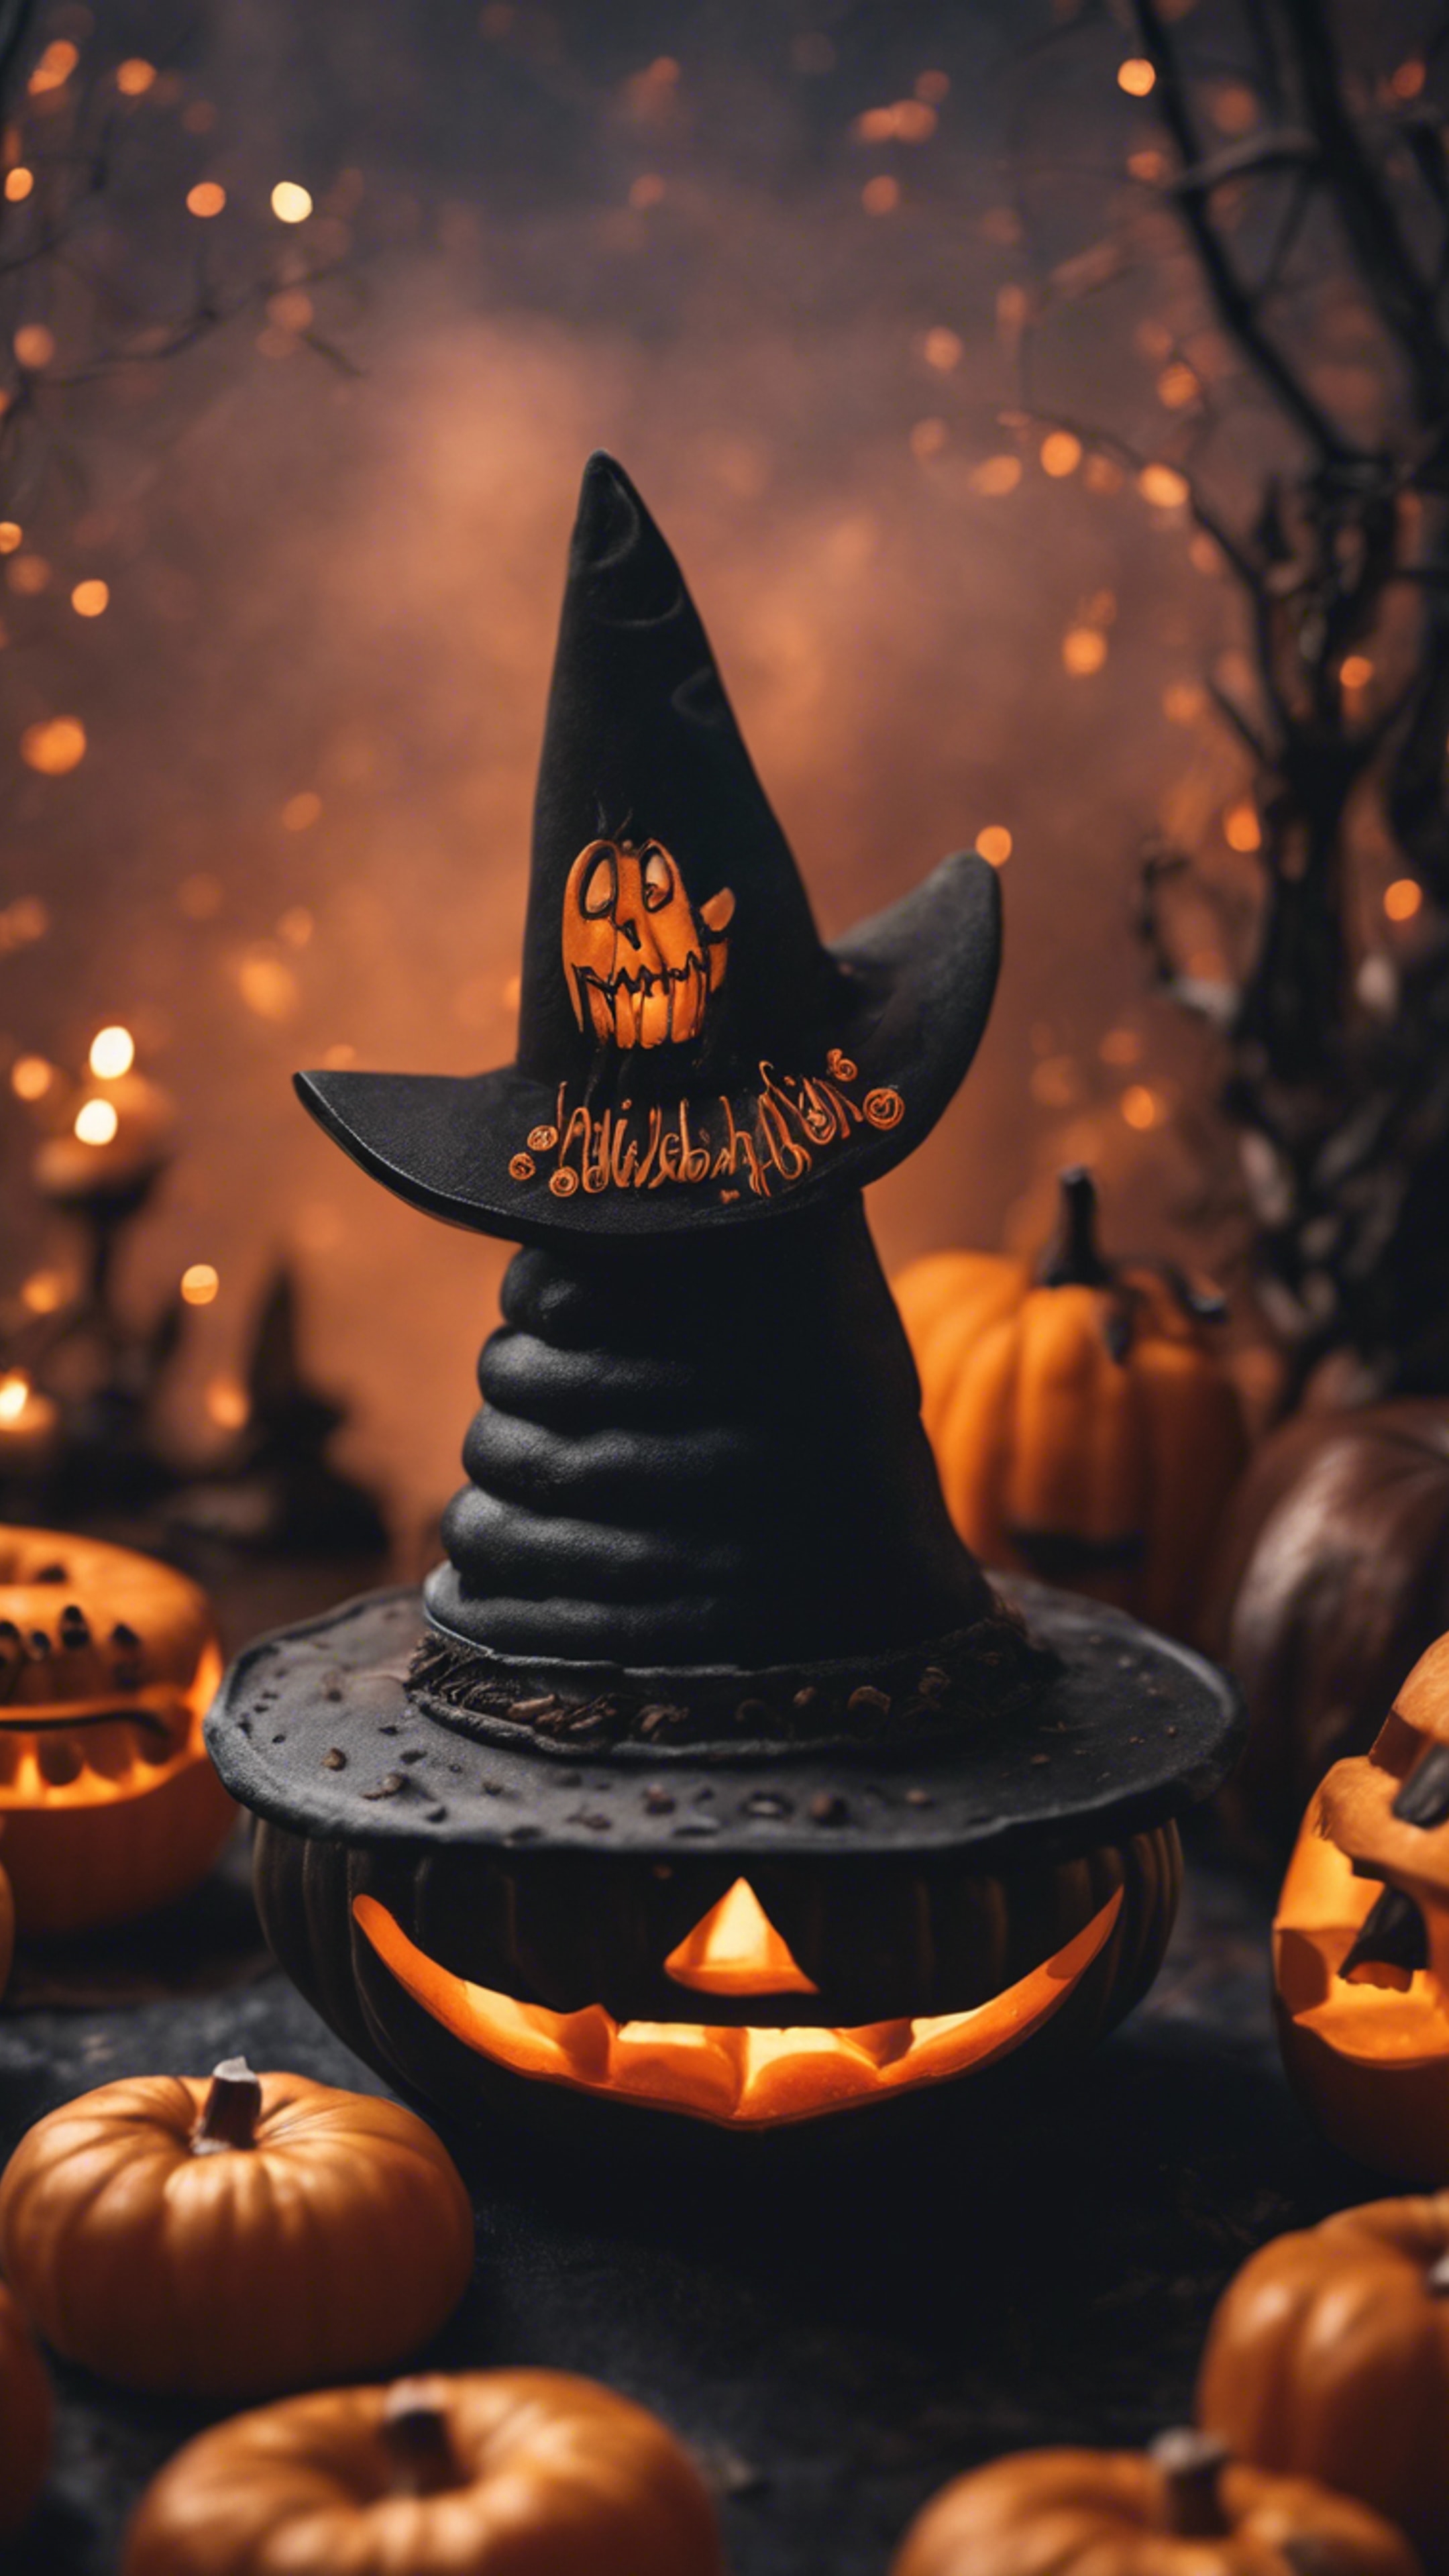 A spooky scene with jack-o-lanterns and a black witch's hat on a pumpkin-spiced donut. Wallpaper[393956df6a264774b0c0]